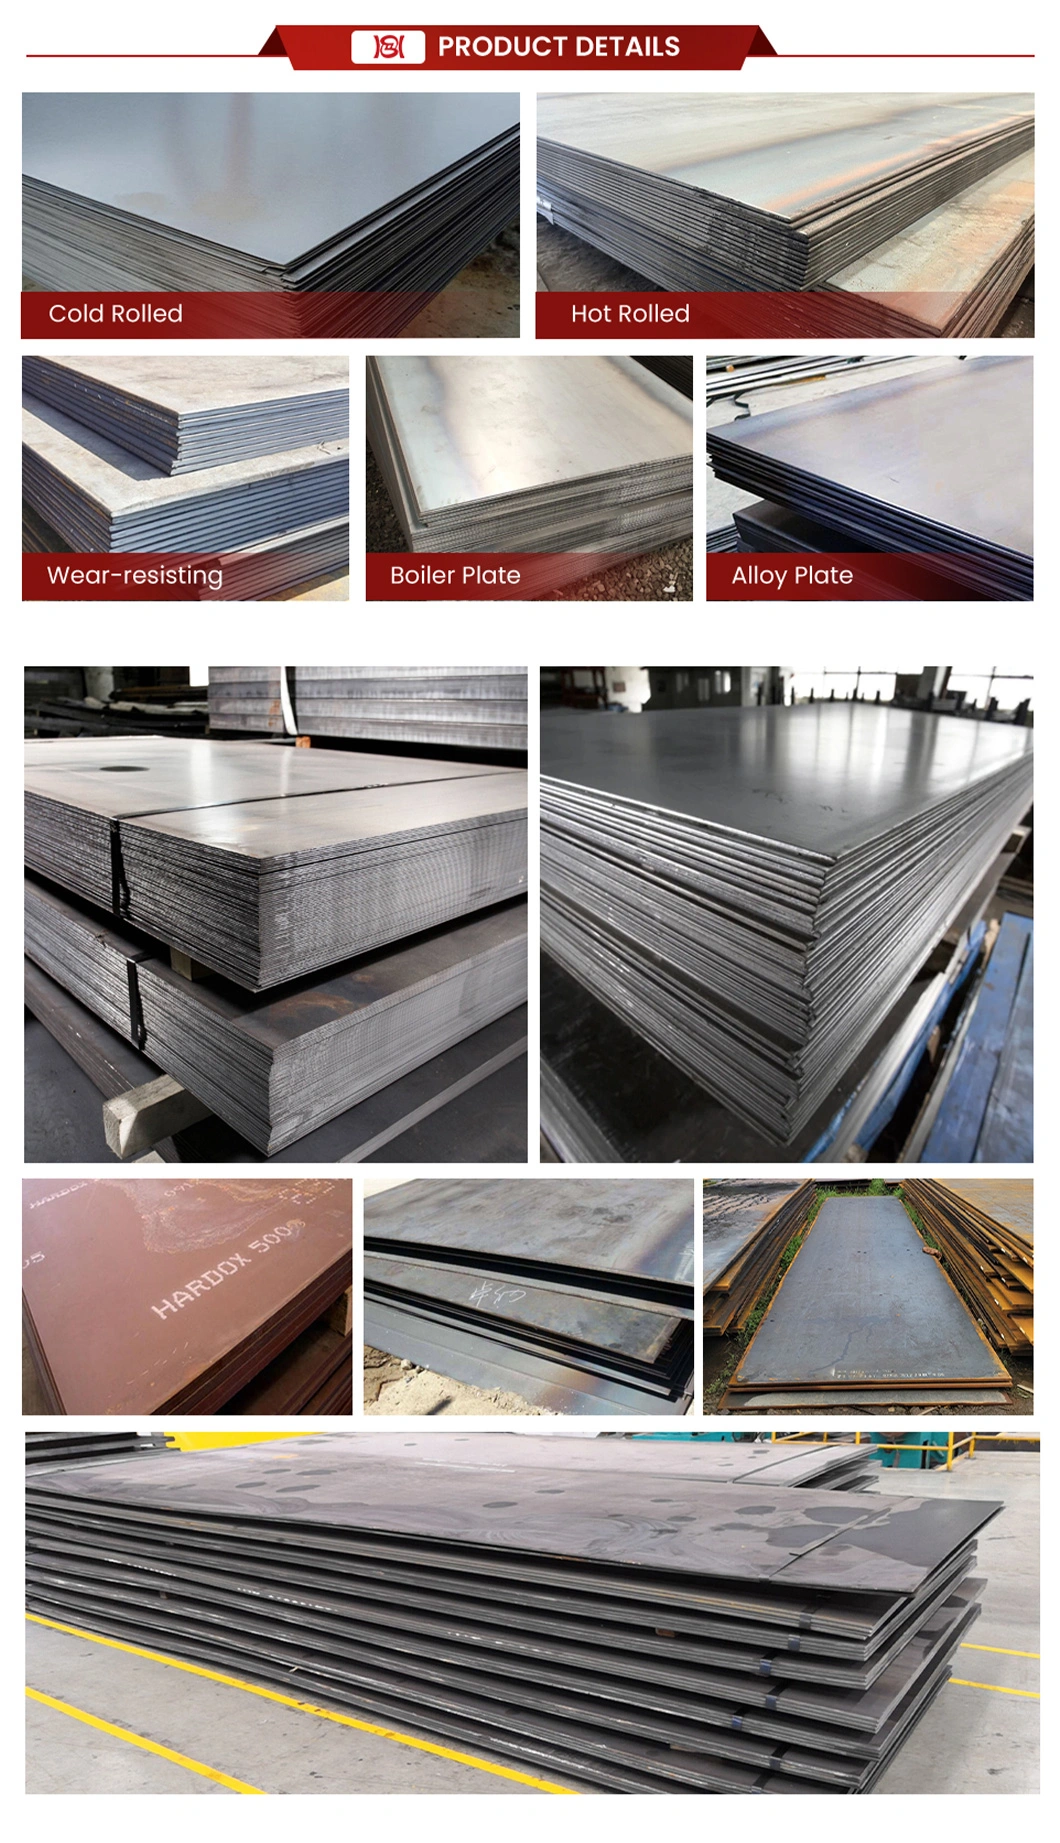 10mm 12mm 35mm Thickness Coated Surface Treatment Q390e Grade 36 16mng A3 Ss330 Material DIN ASTM AISI JIS GB Medium and Heavy Carbon Steel Plate